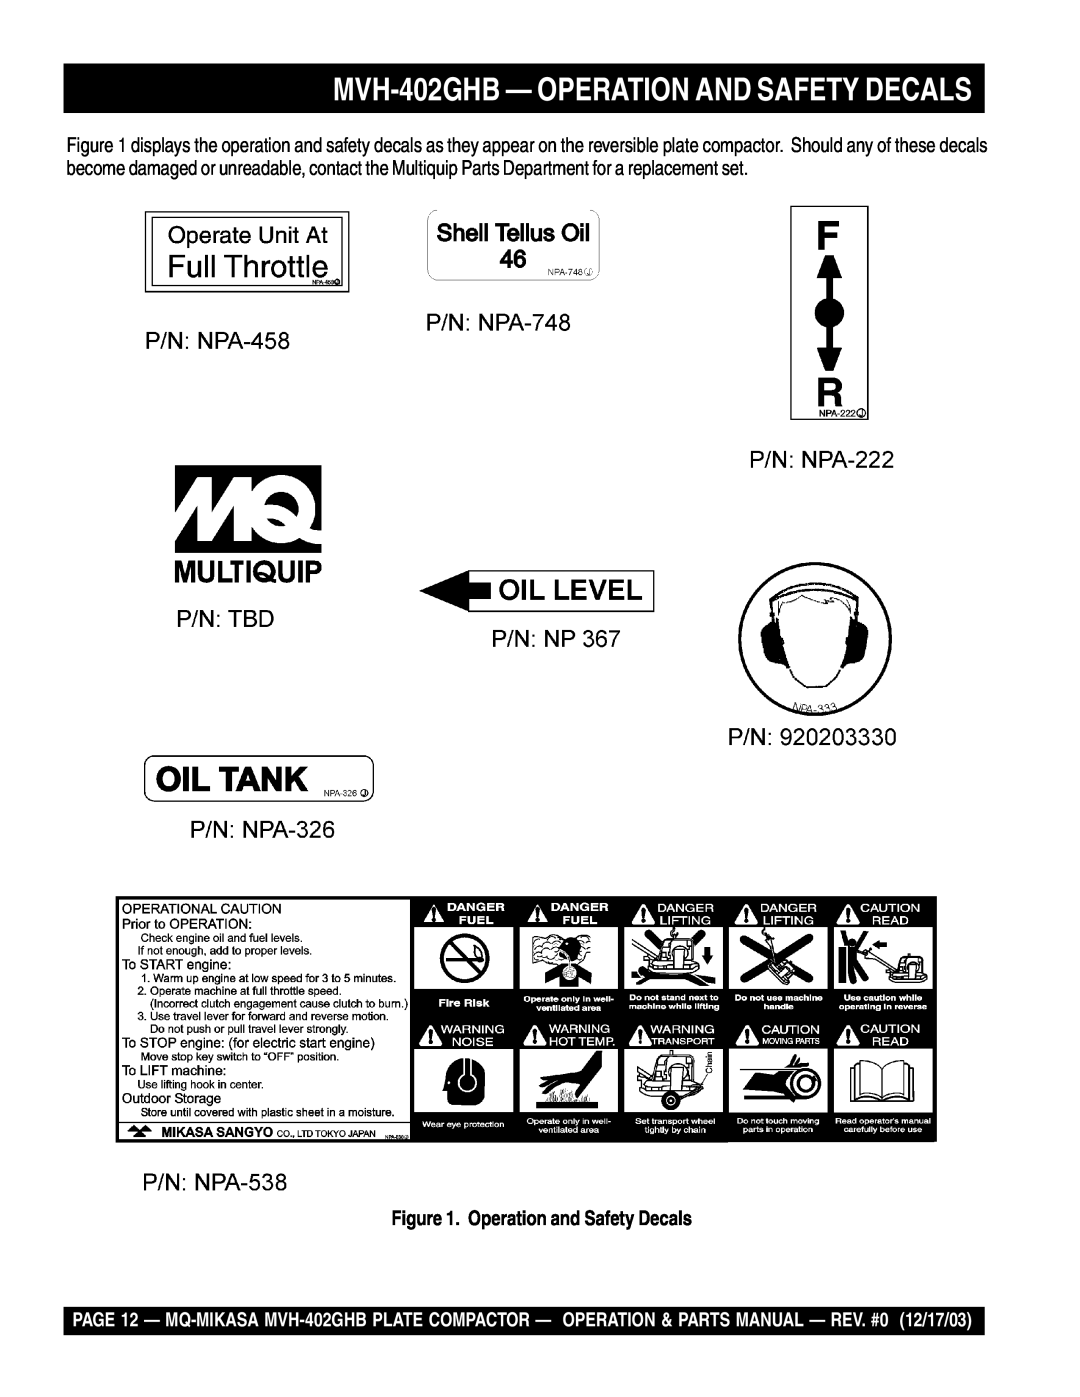 Multiquip manual MVH-402GHB- OPERATION AND SAFETY DECALS, Operation and Safety Decals 